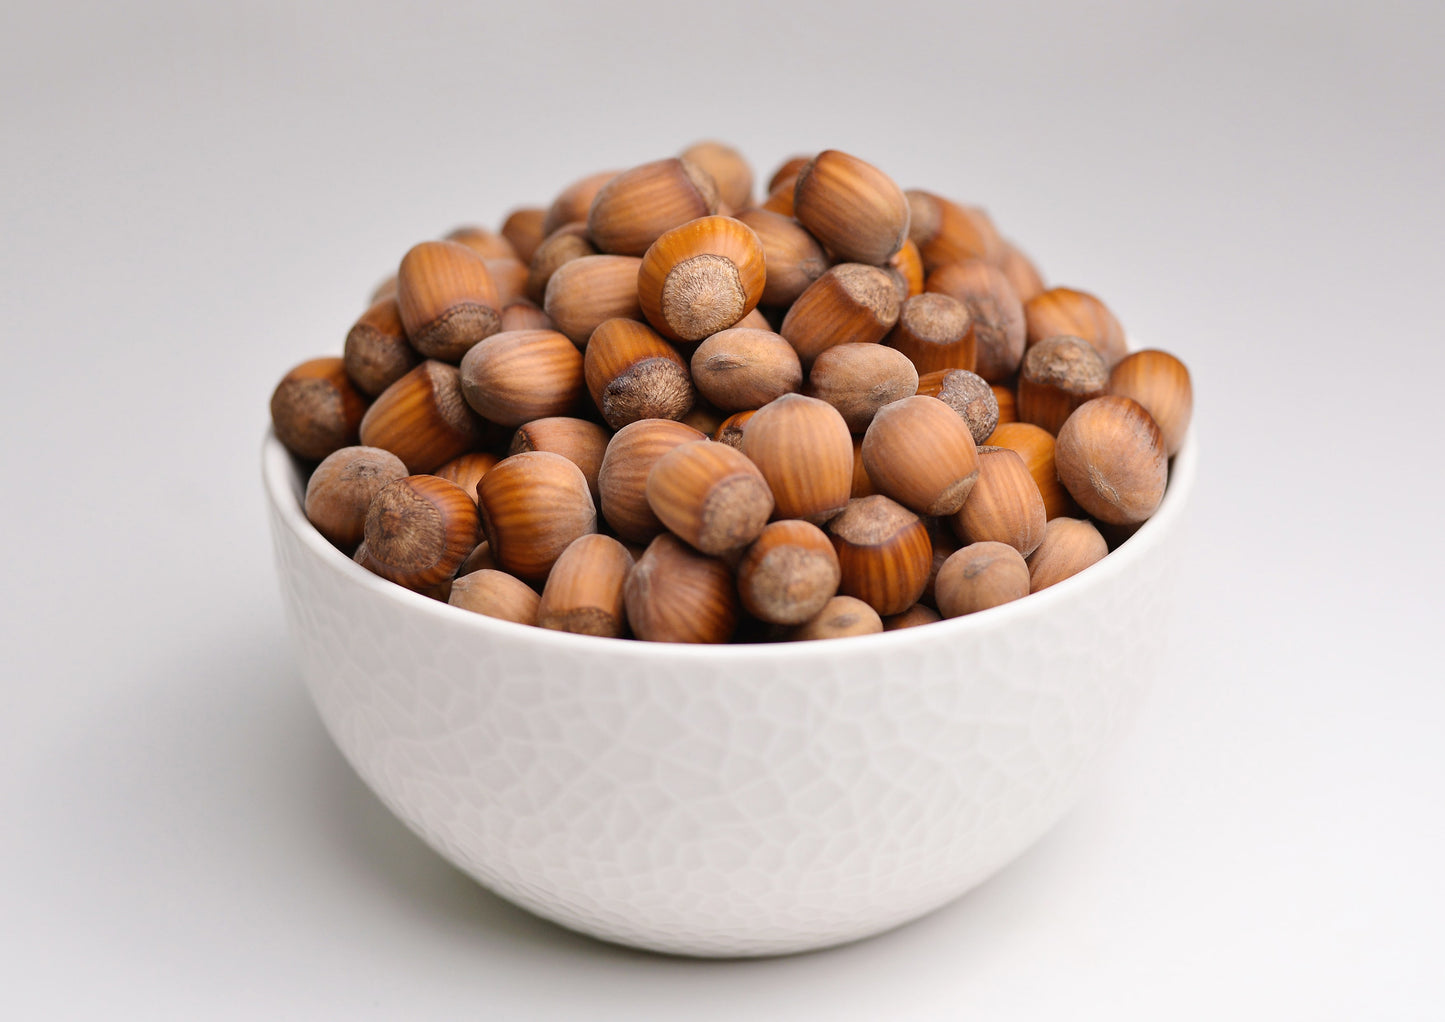 Dry Roasted Blanched Hazelnuts with Himalayan Salt, X Pounds – Oven Roasted, Lightly Salted, No Oil Added, No Skin, Unsalted, Kosher, Vegan